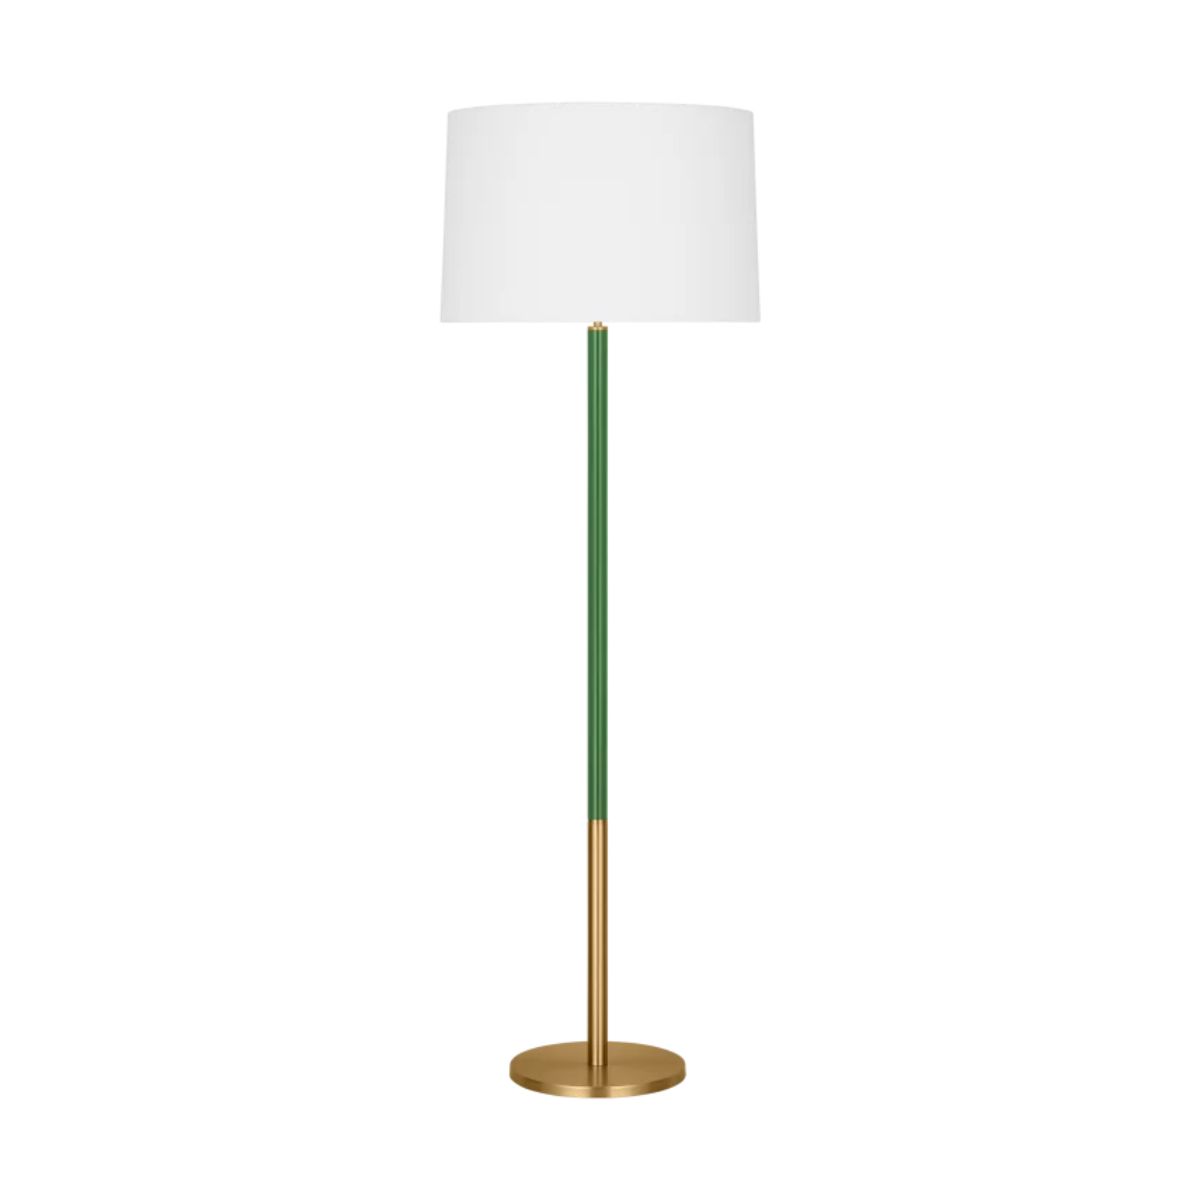 Monroe Large Floor Lamp with White Accents - Bees Lighting